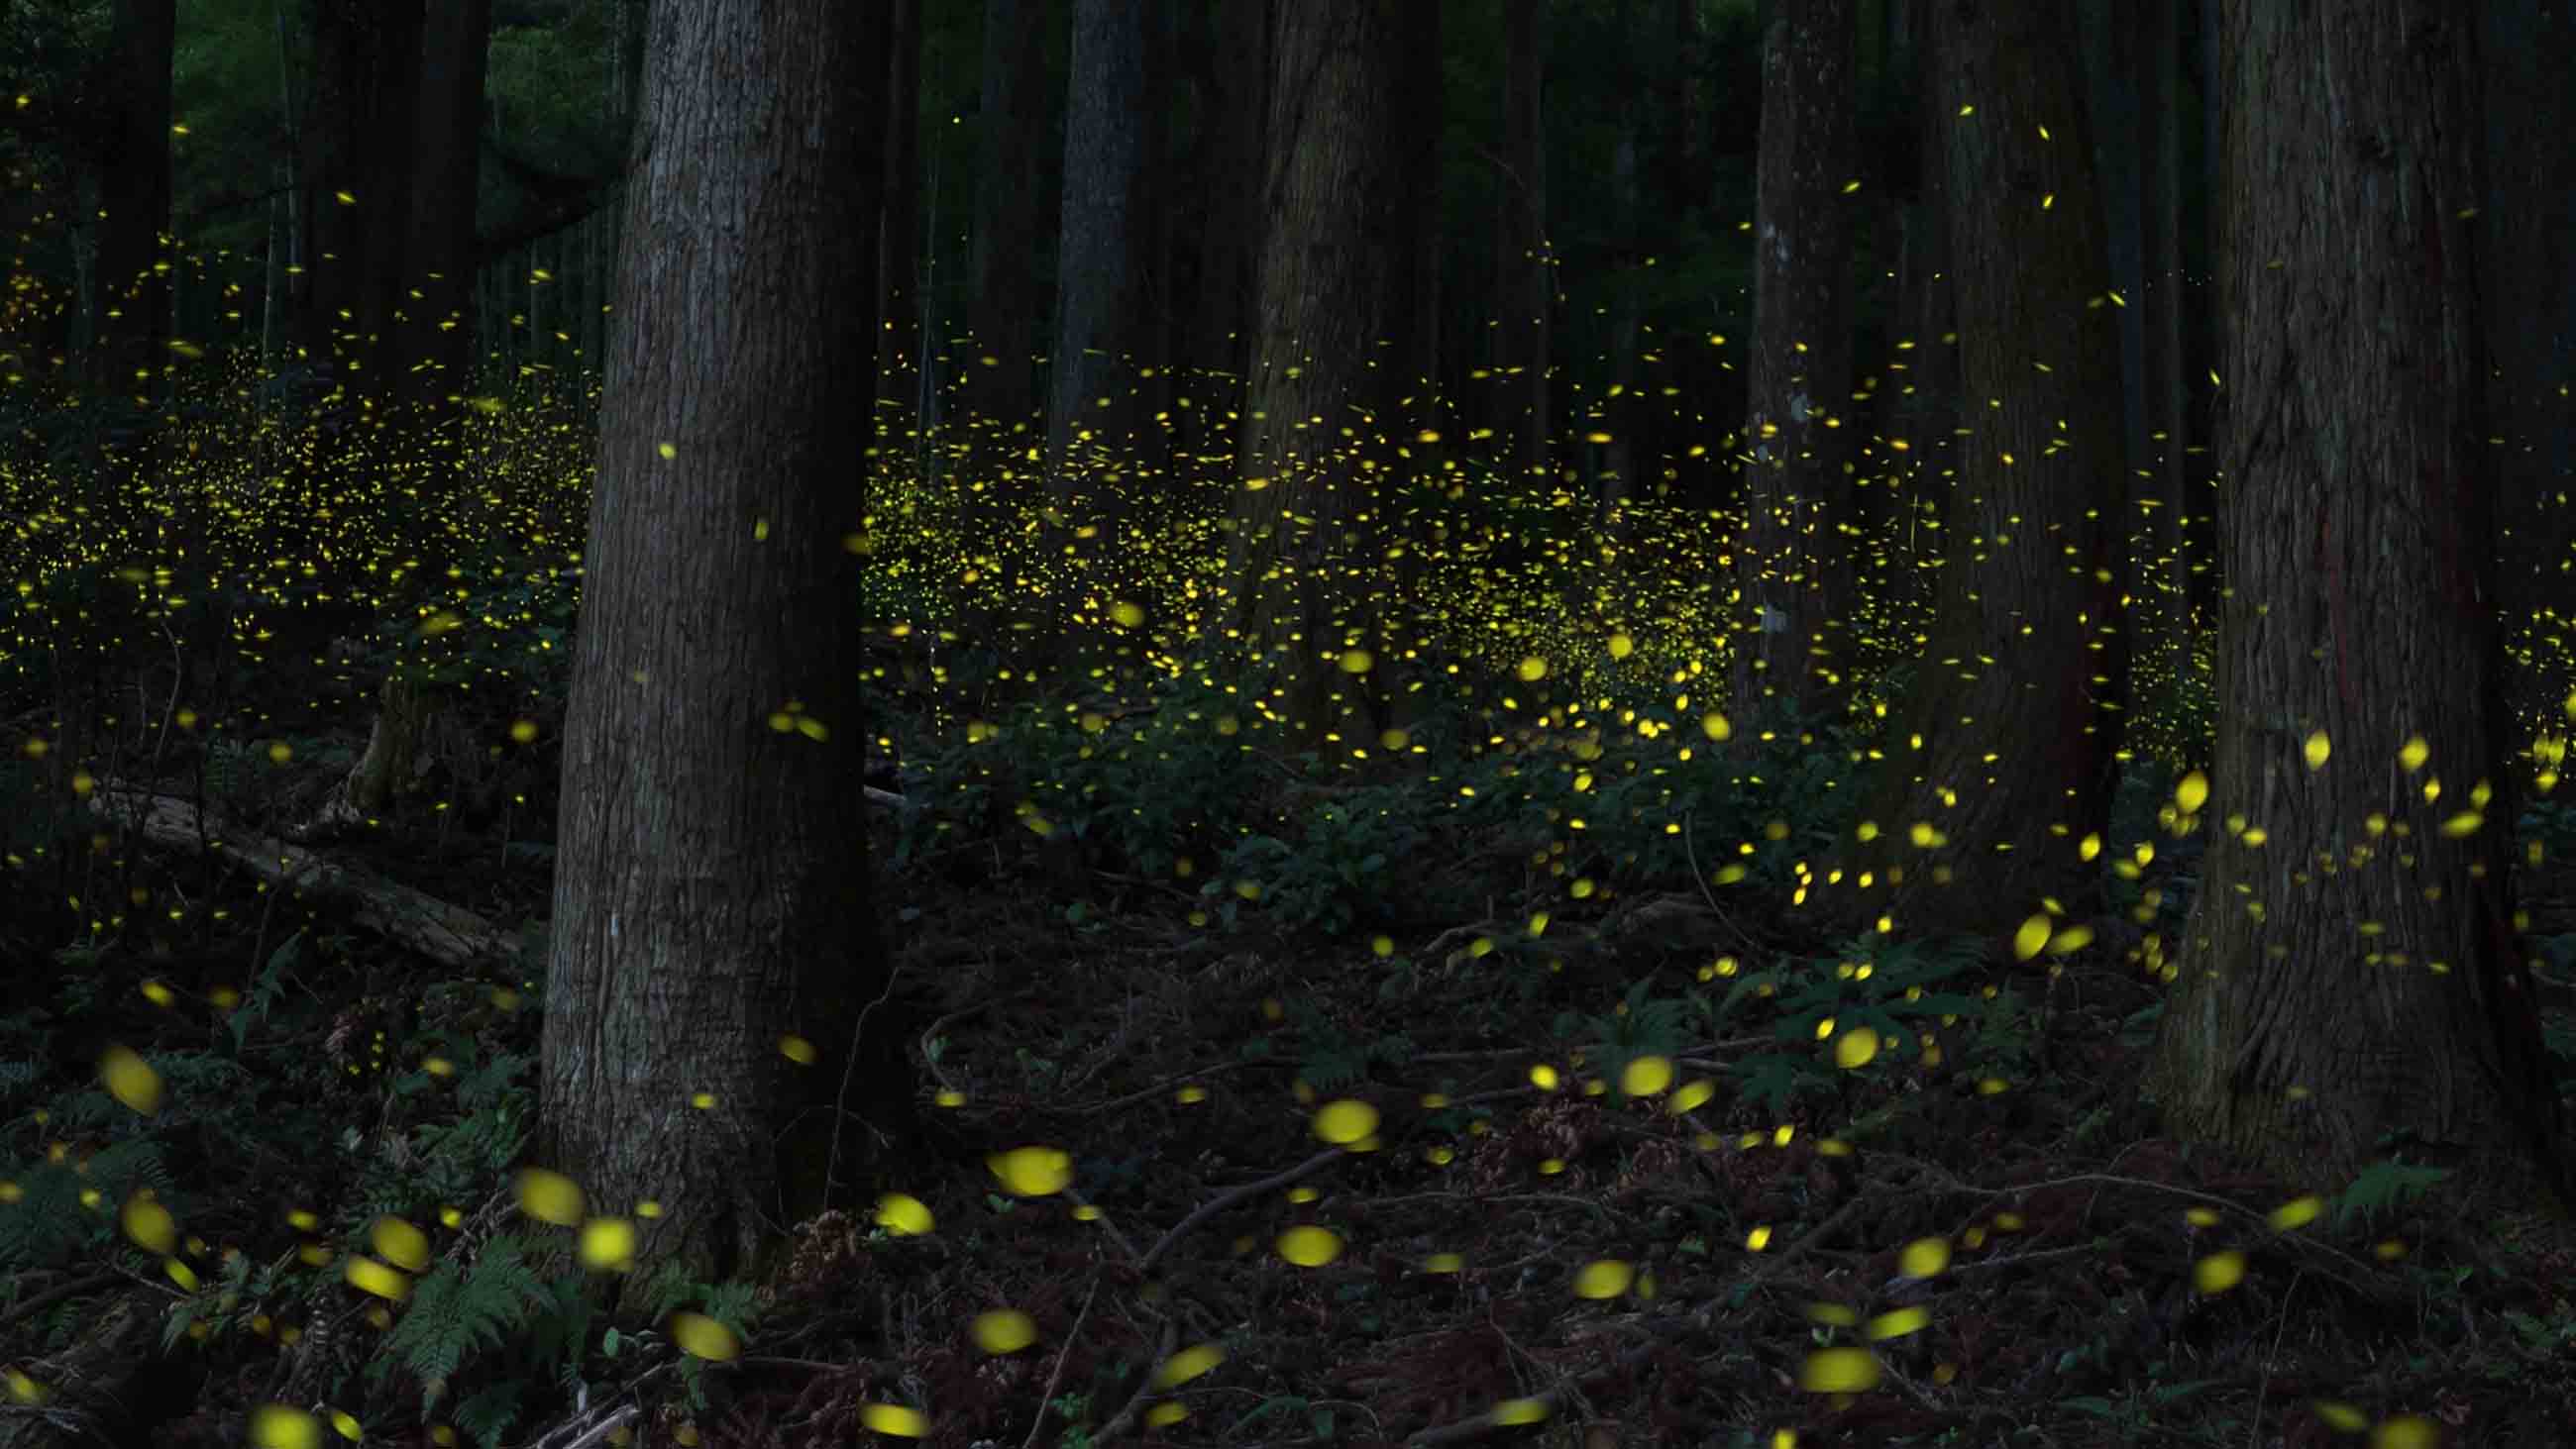 Japanese fireflies were overexploited for their luminous beauty: Ironically, they were nearly loved to death.